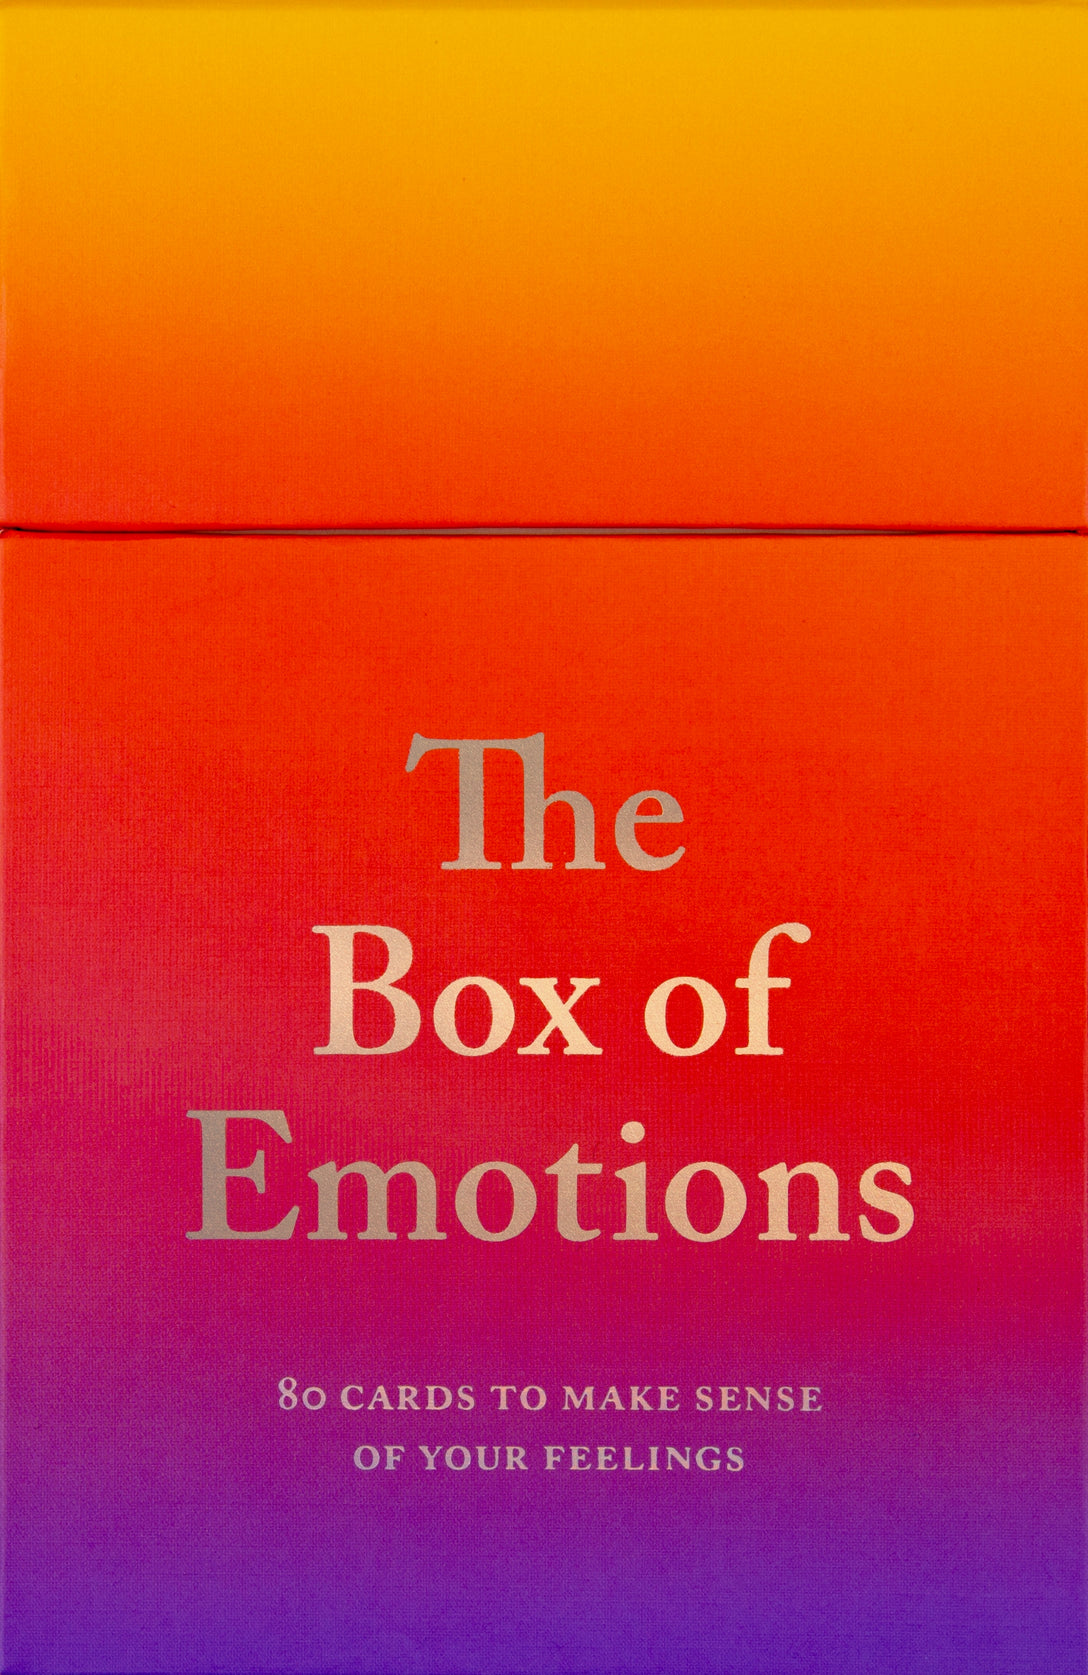 The Box of Emotions by Therese Vandling, Tiffany Watt Smith